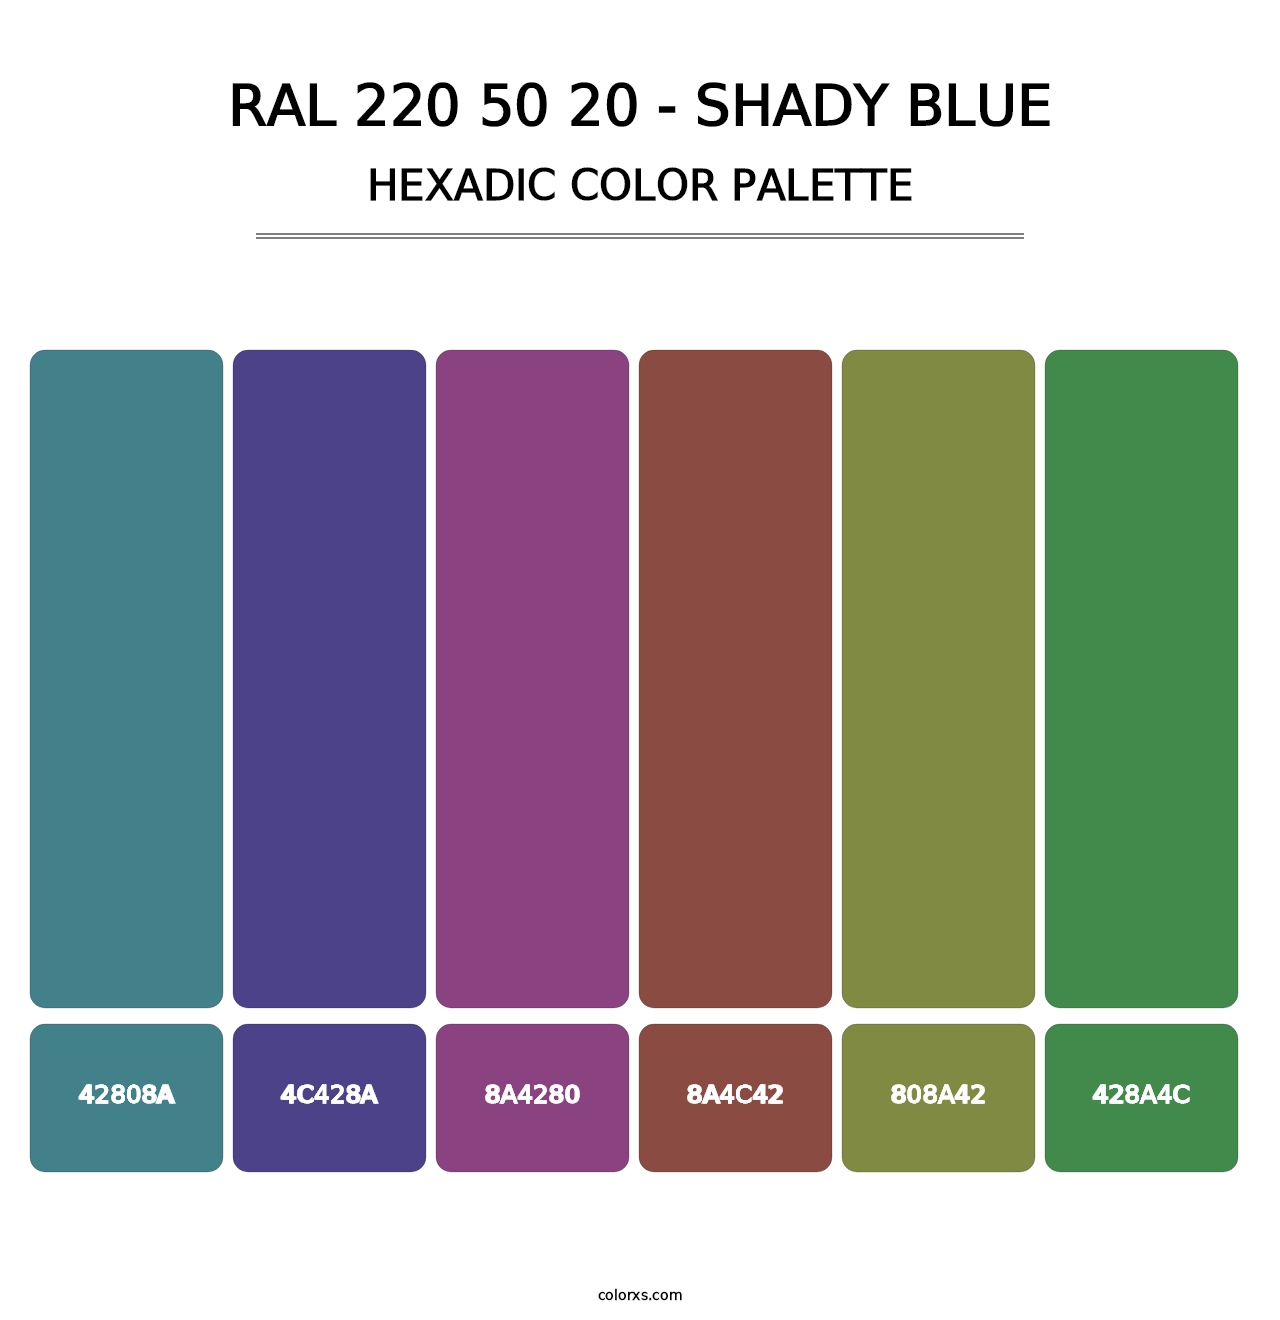 RAL 220 50 20 - Shady Blue - Hexadic Color Palette